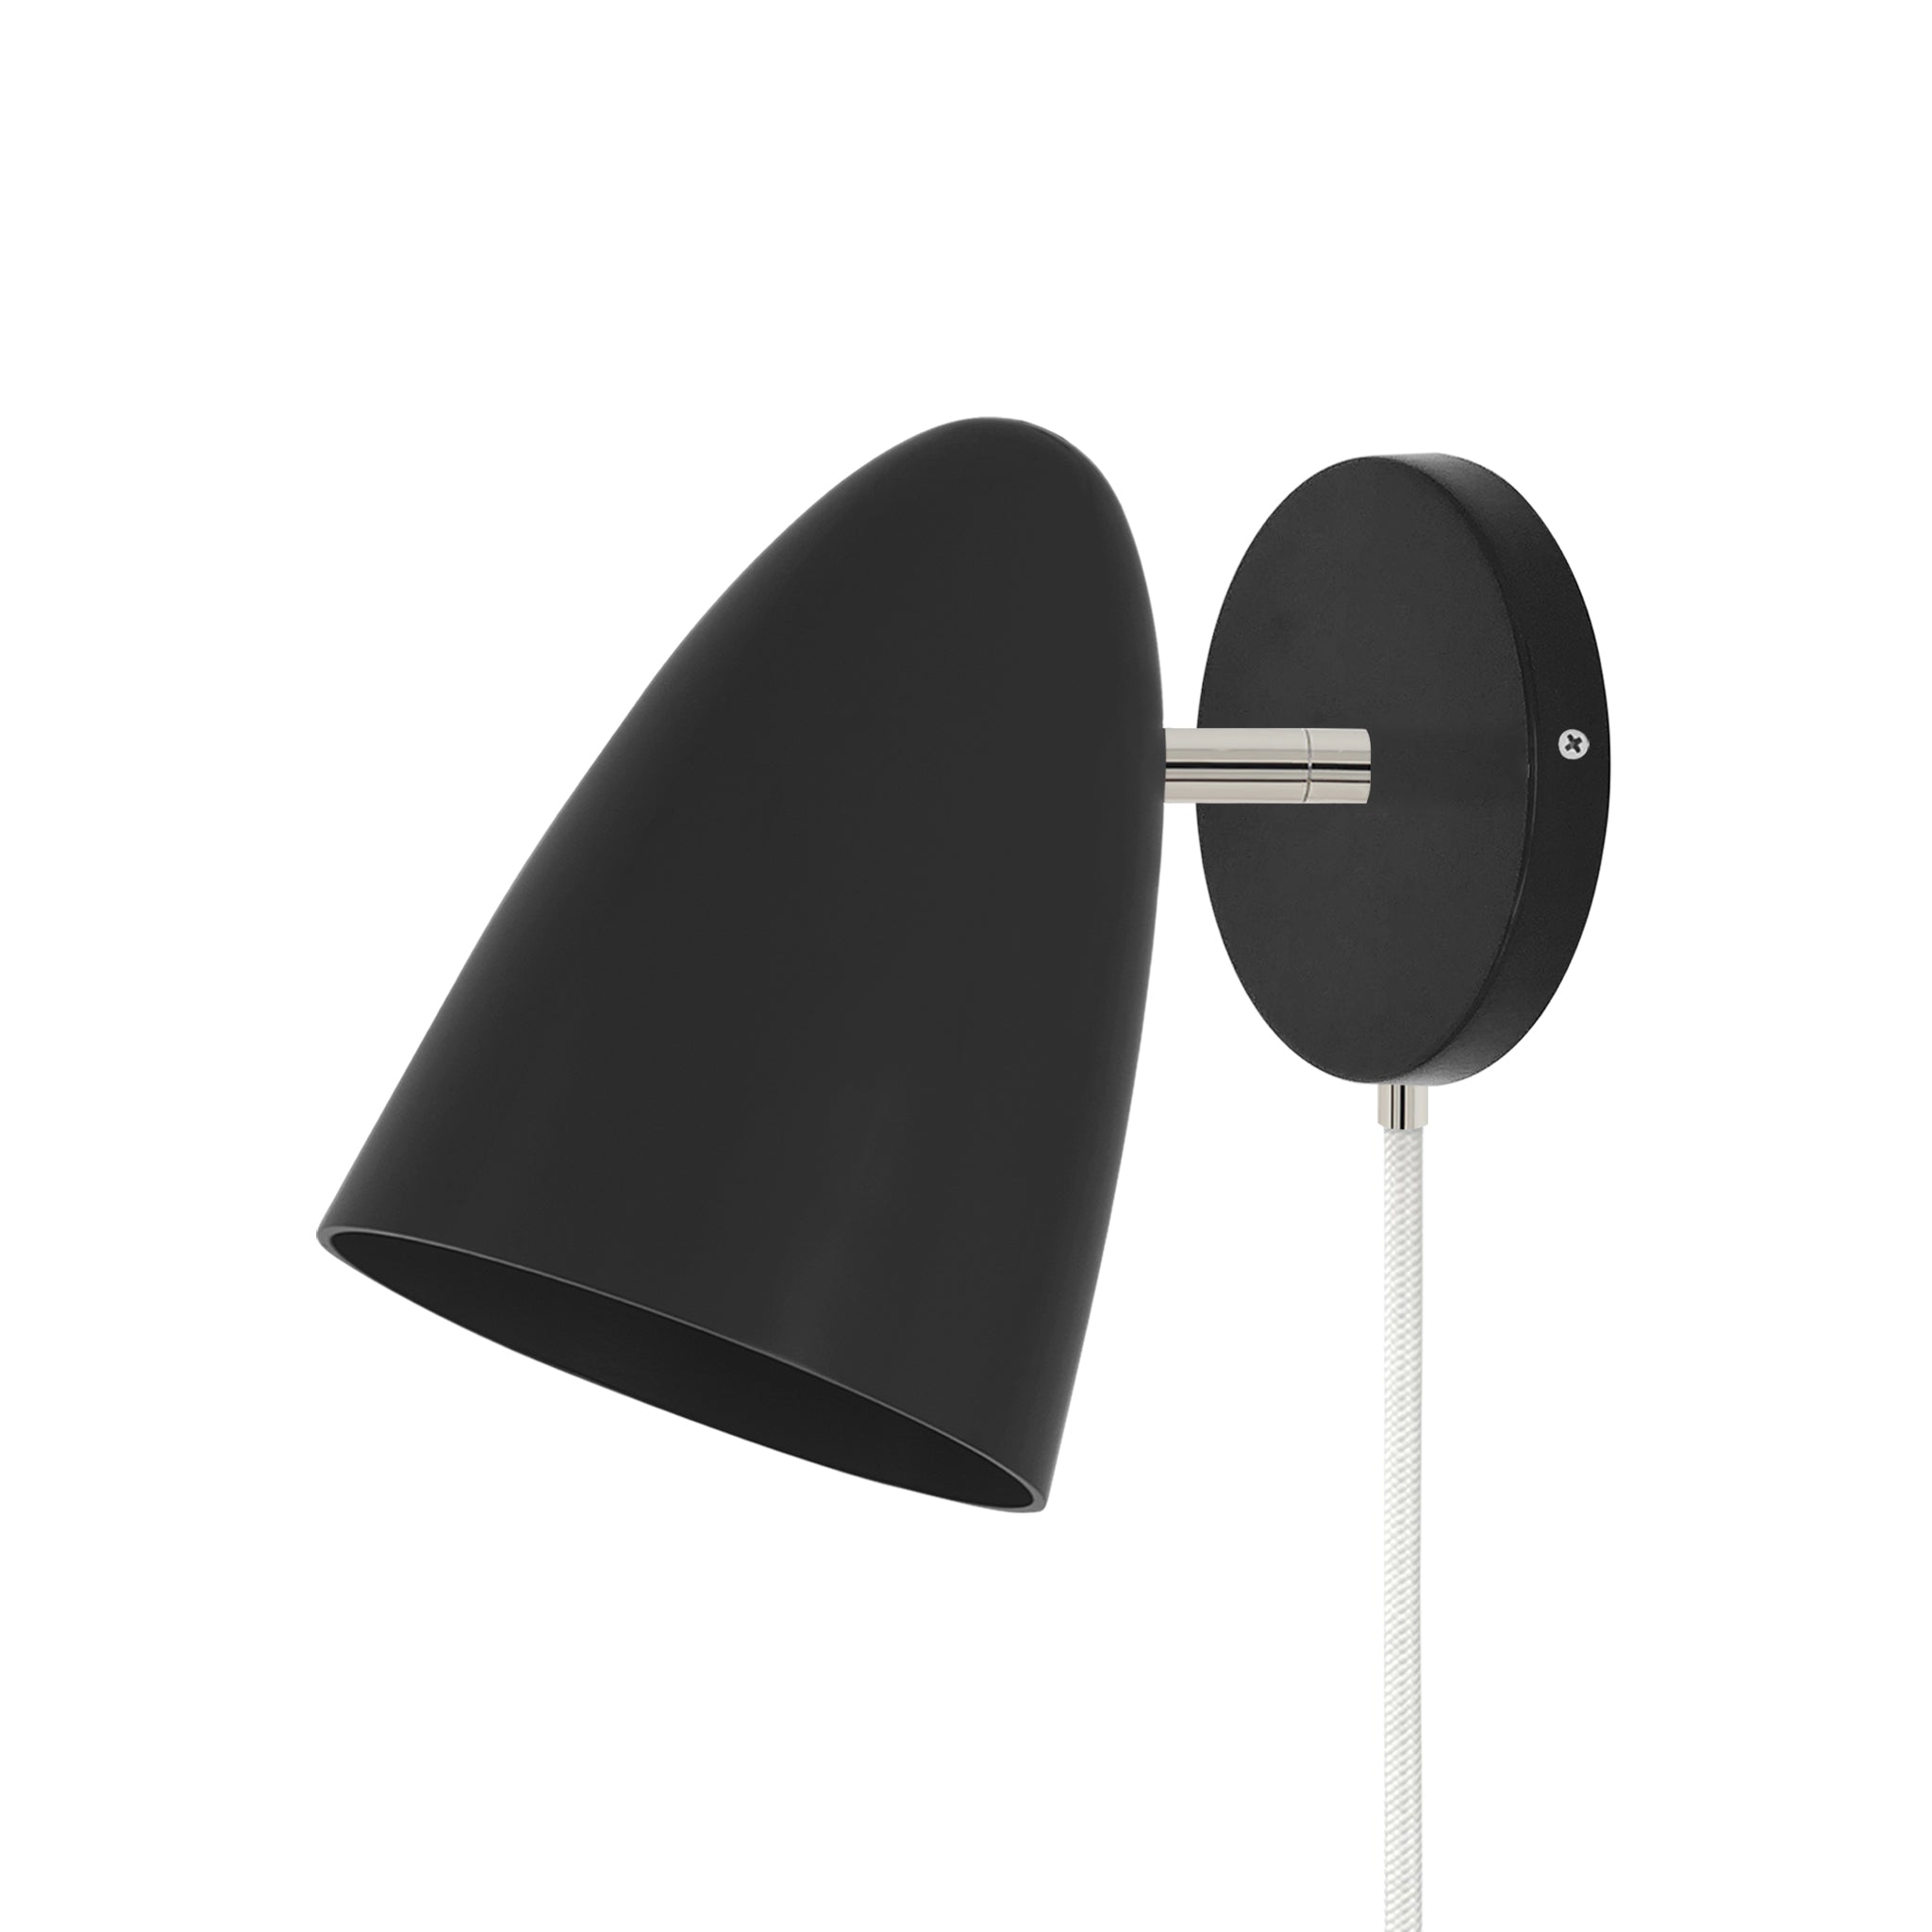 Nickel and black color Boom plug-in sconce no arm Dutton Brown lighting